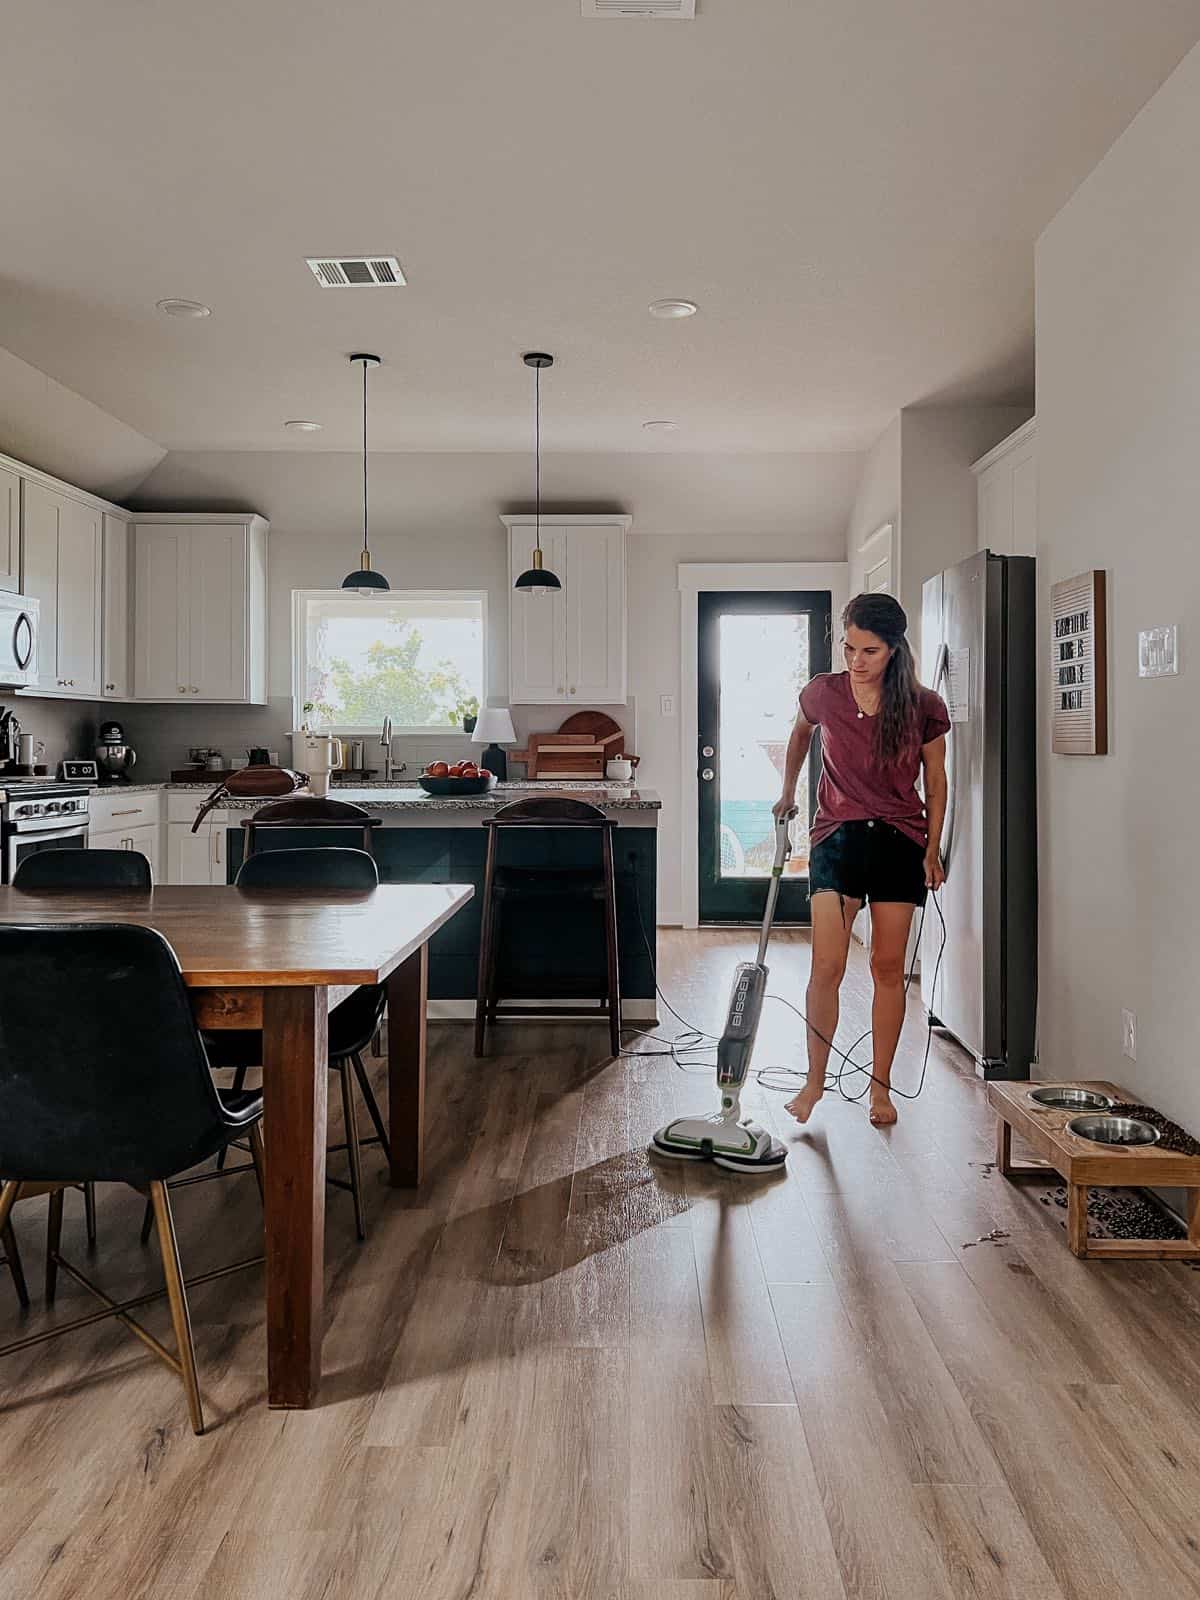 How To Mop a Floor So It's Actually Clean [Beginner's Guide]